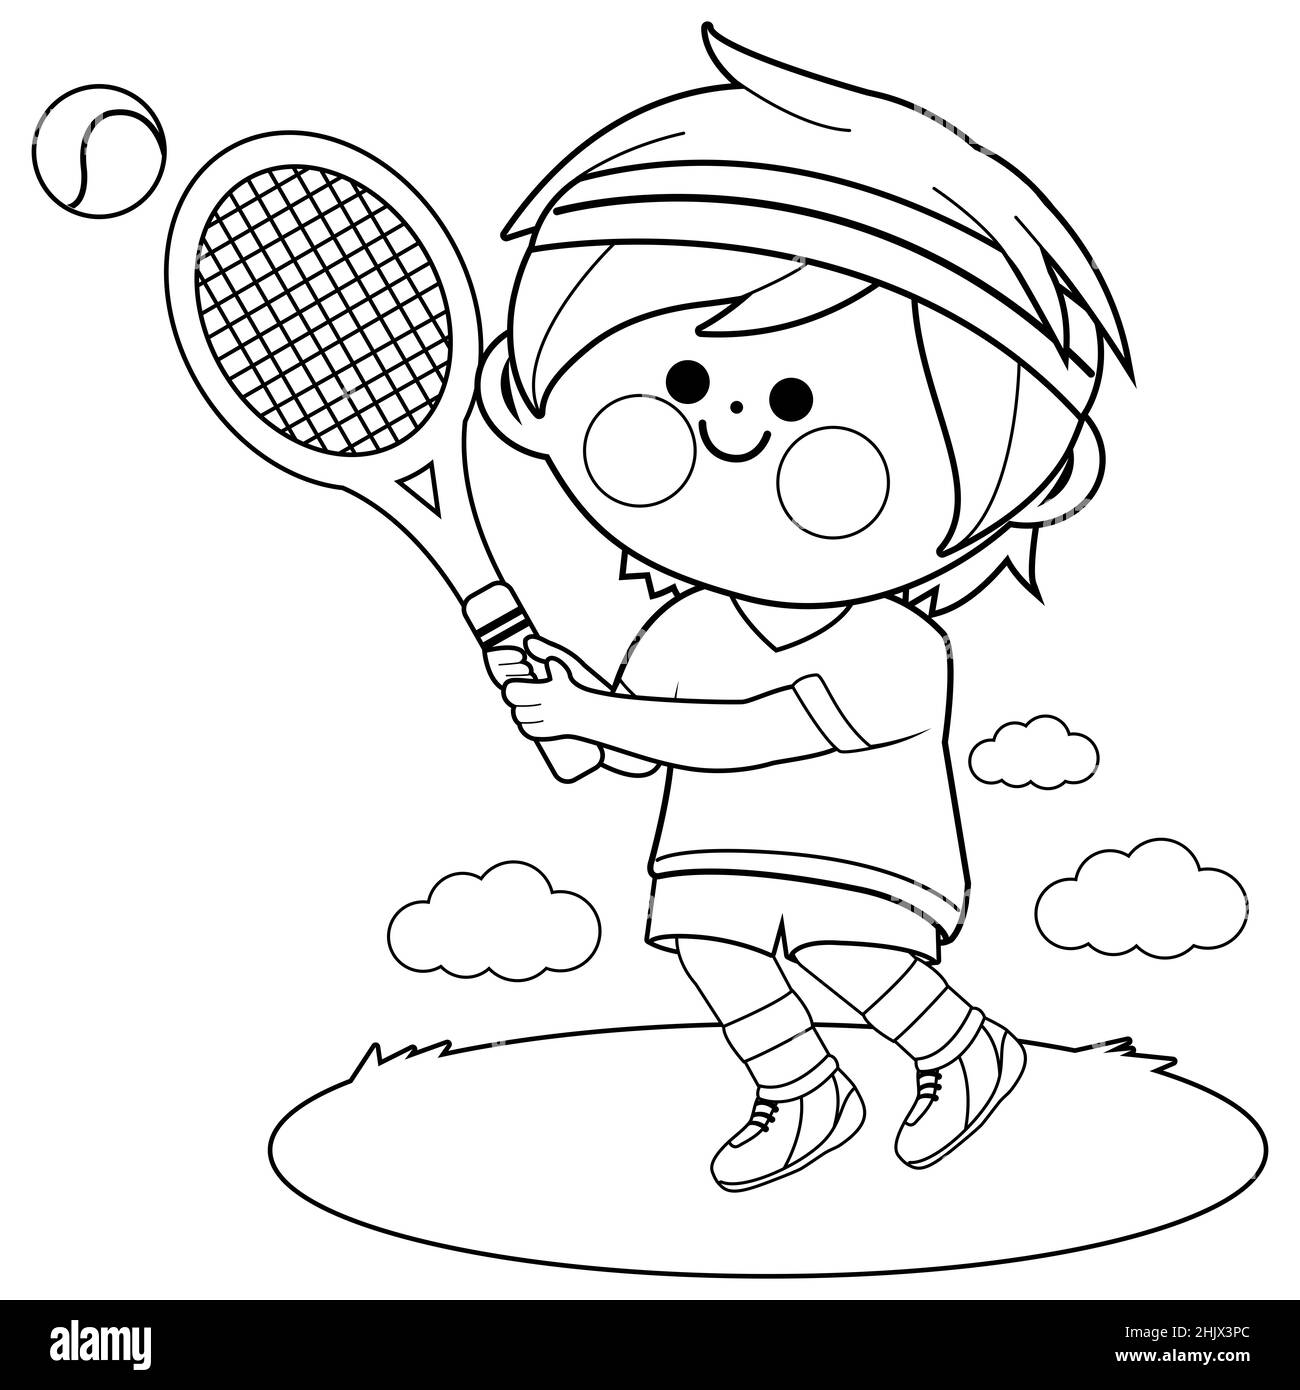 Boy playing tennis. Black and white coloring page Stock Photo